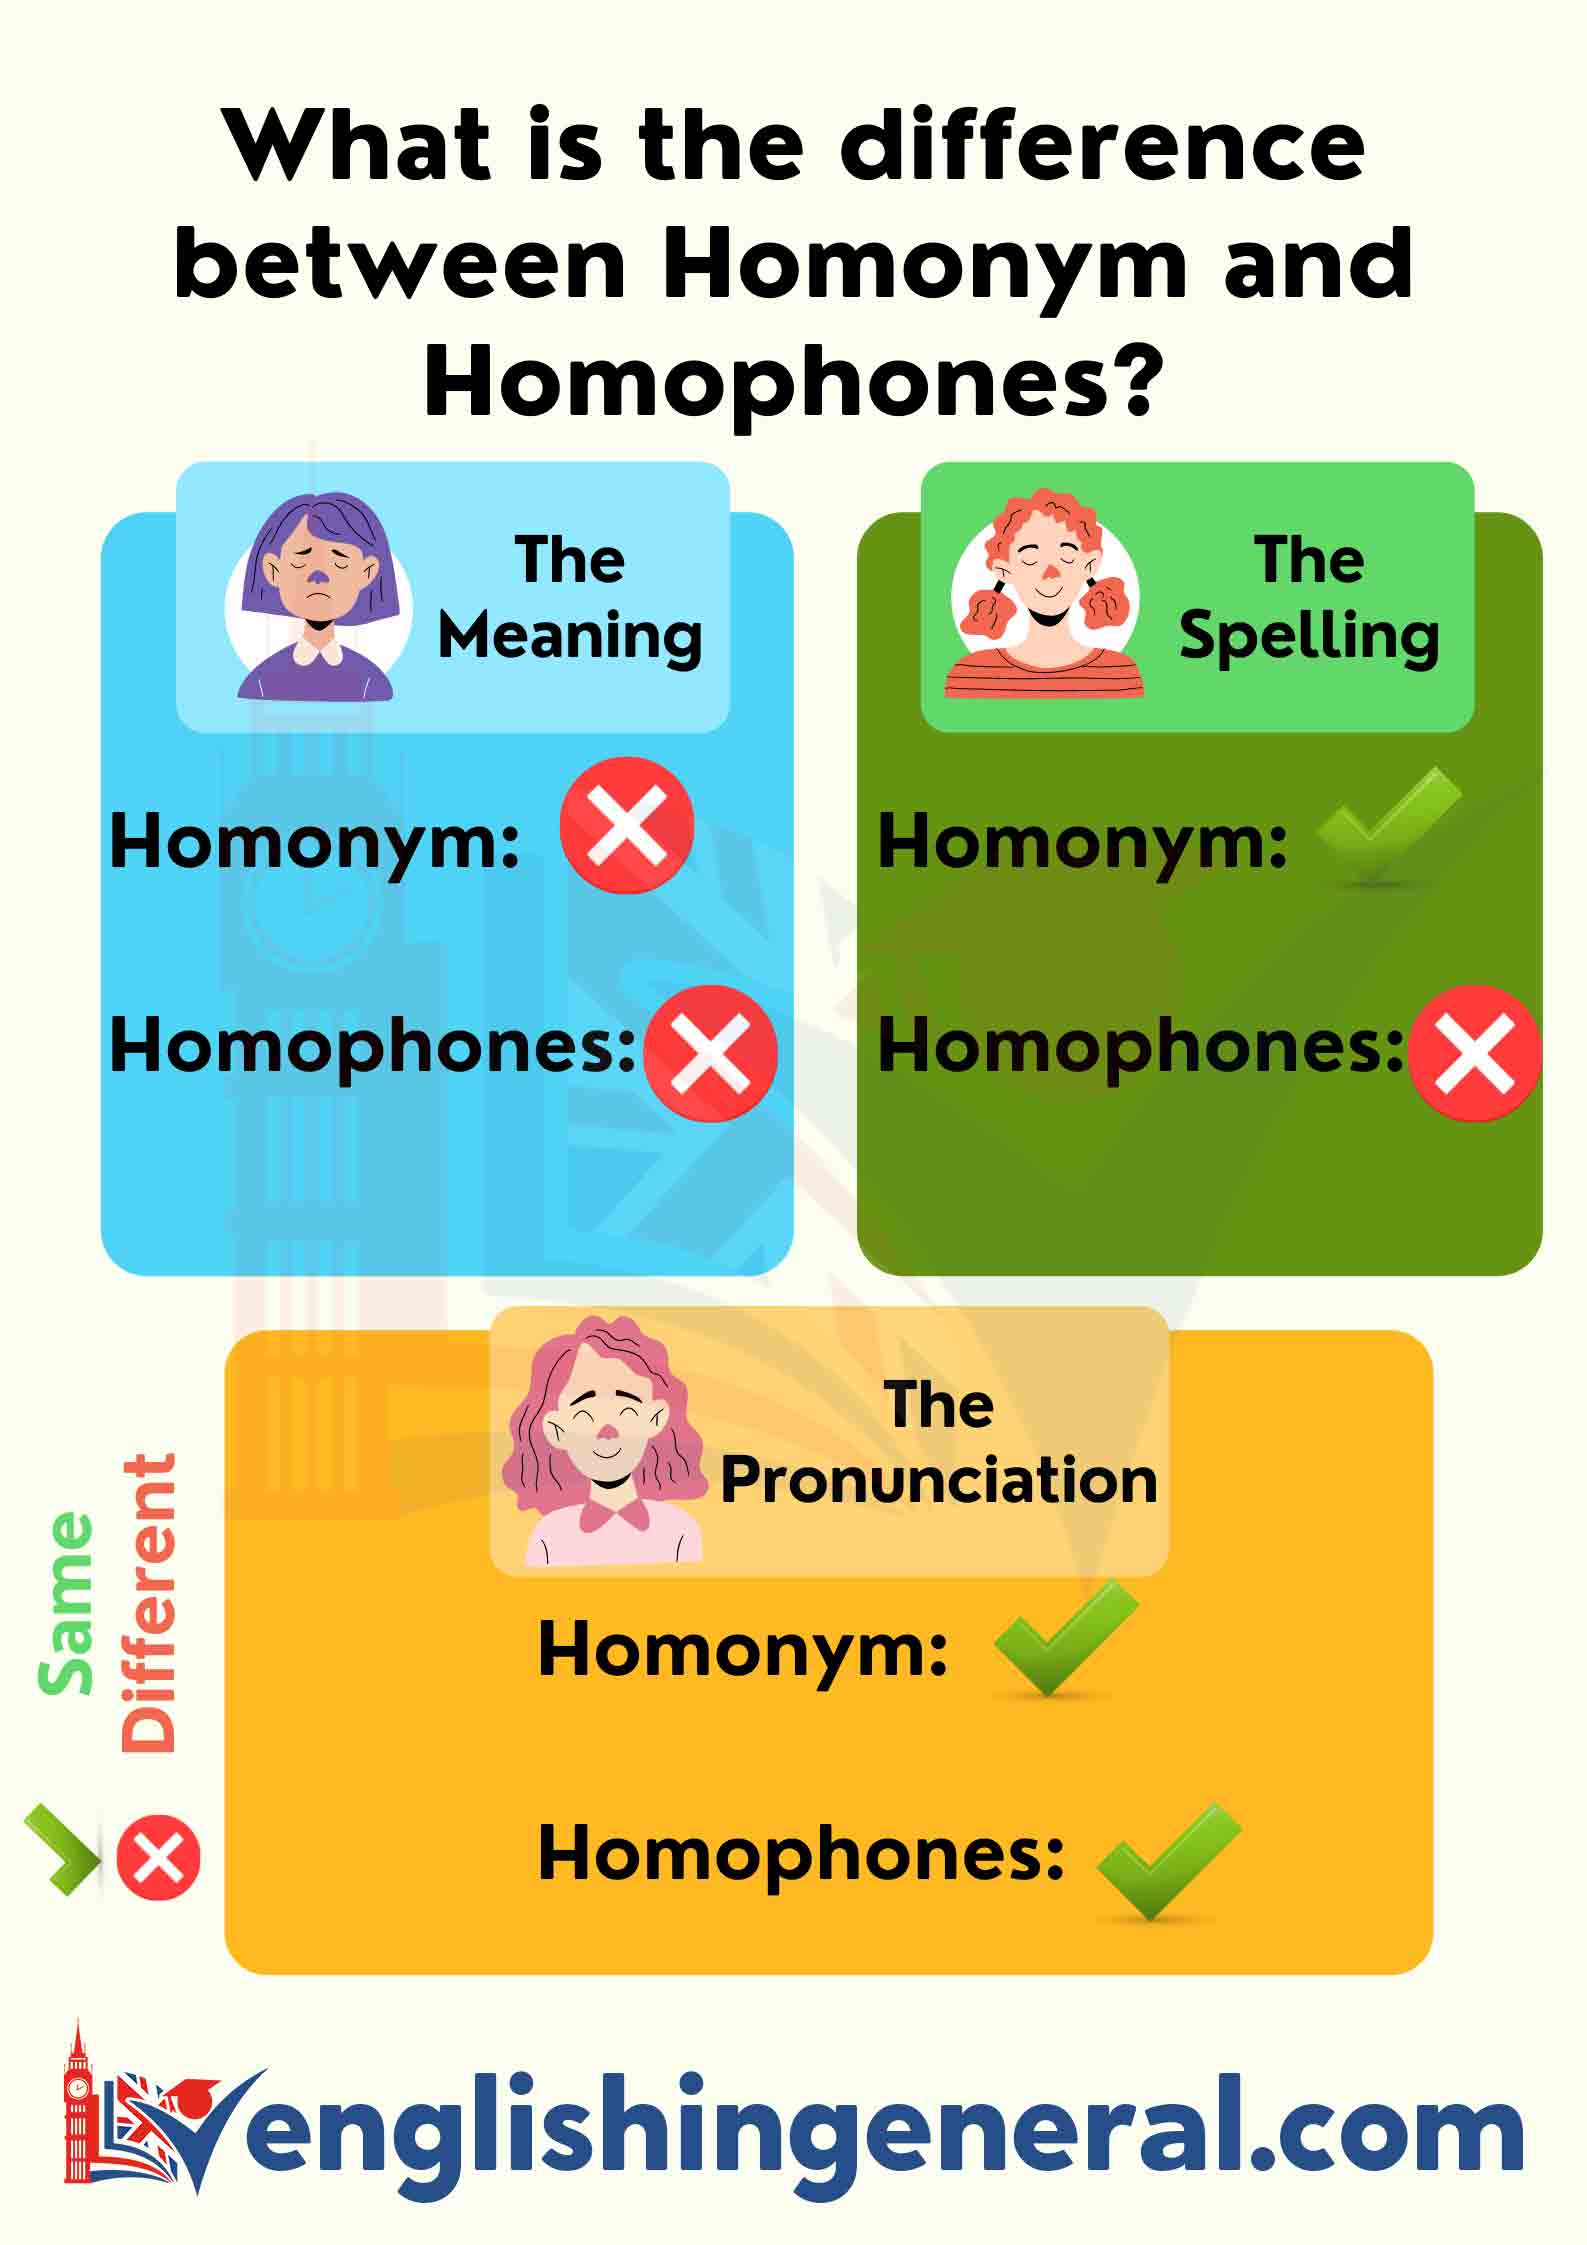 Know vs. No - Homophones, Meaning & Spelling